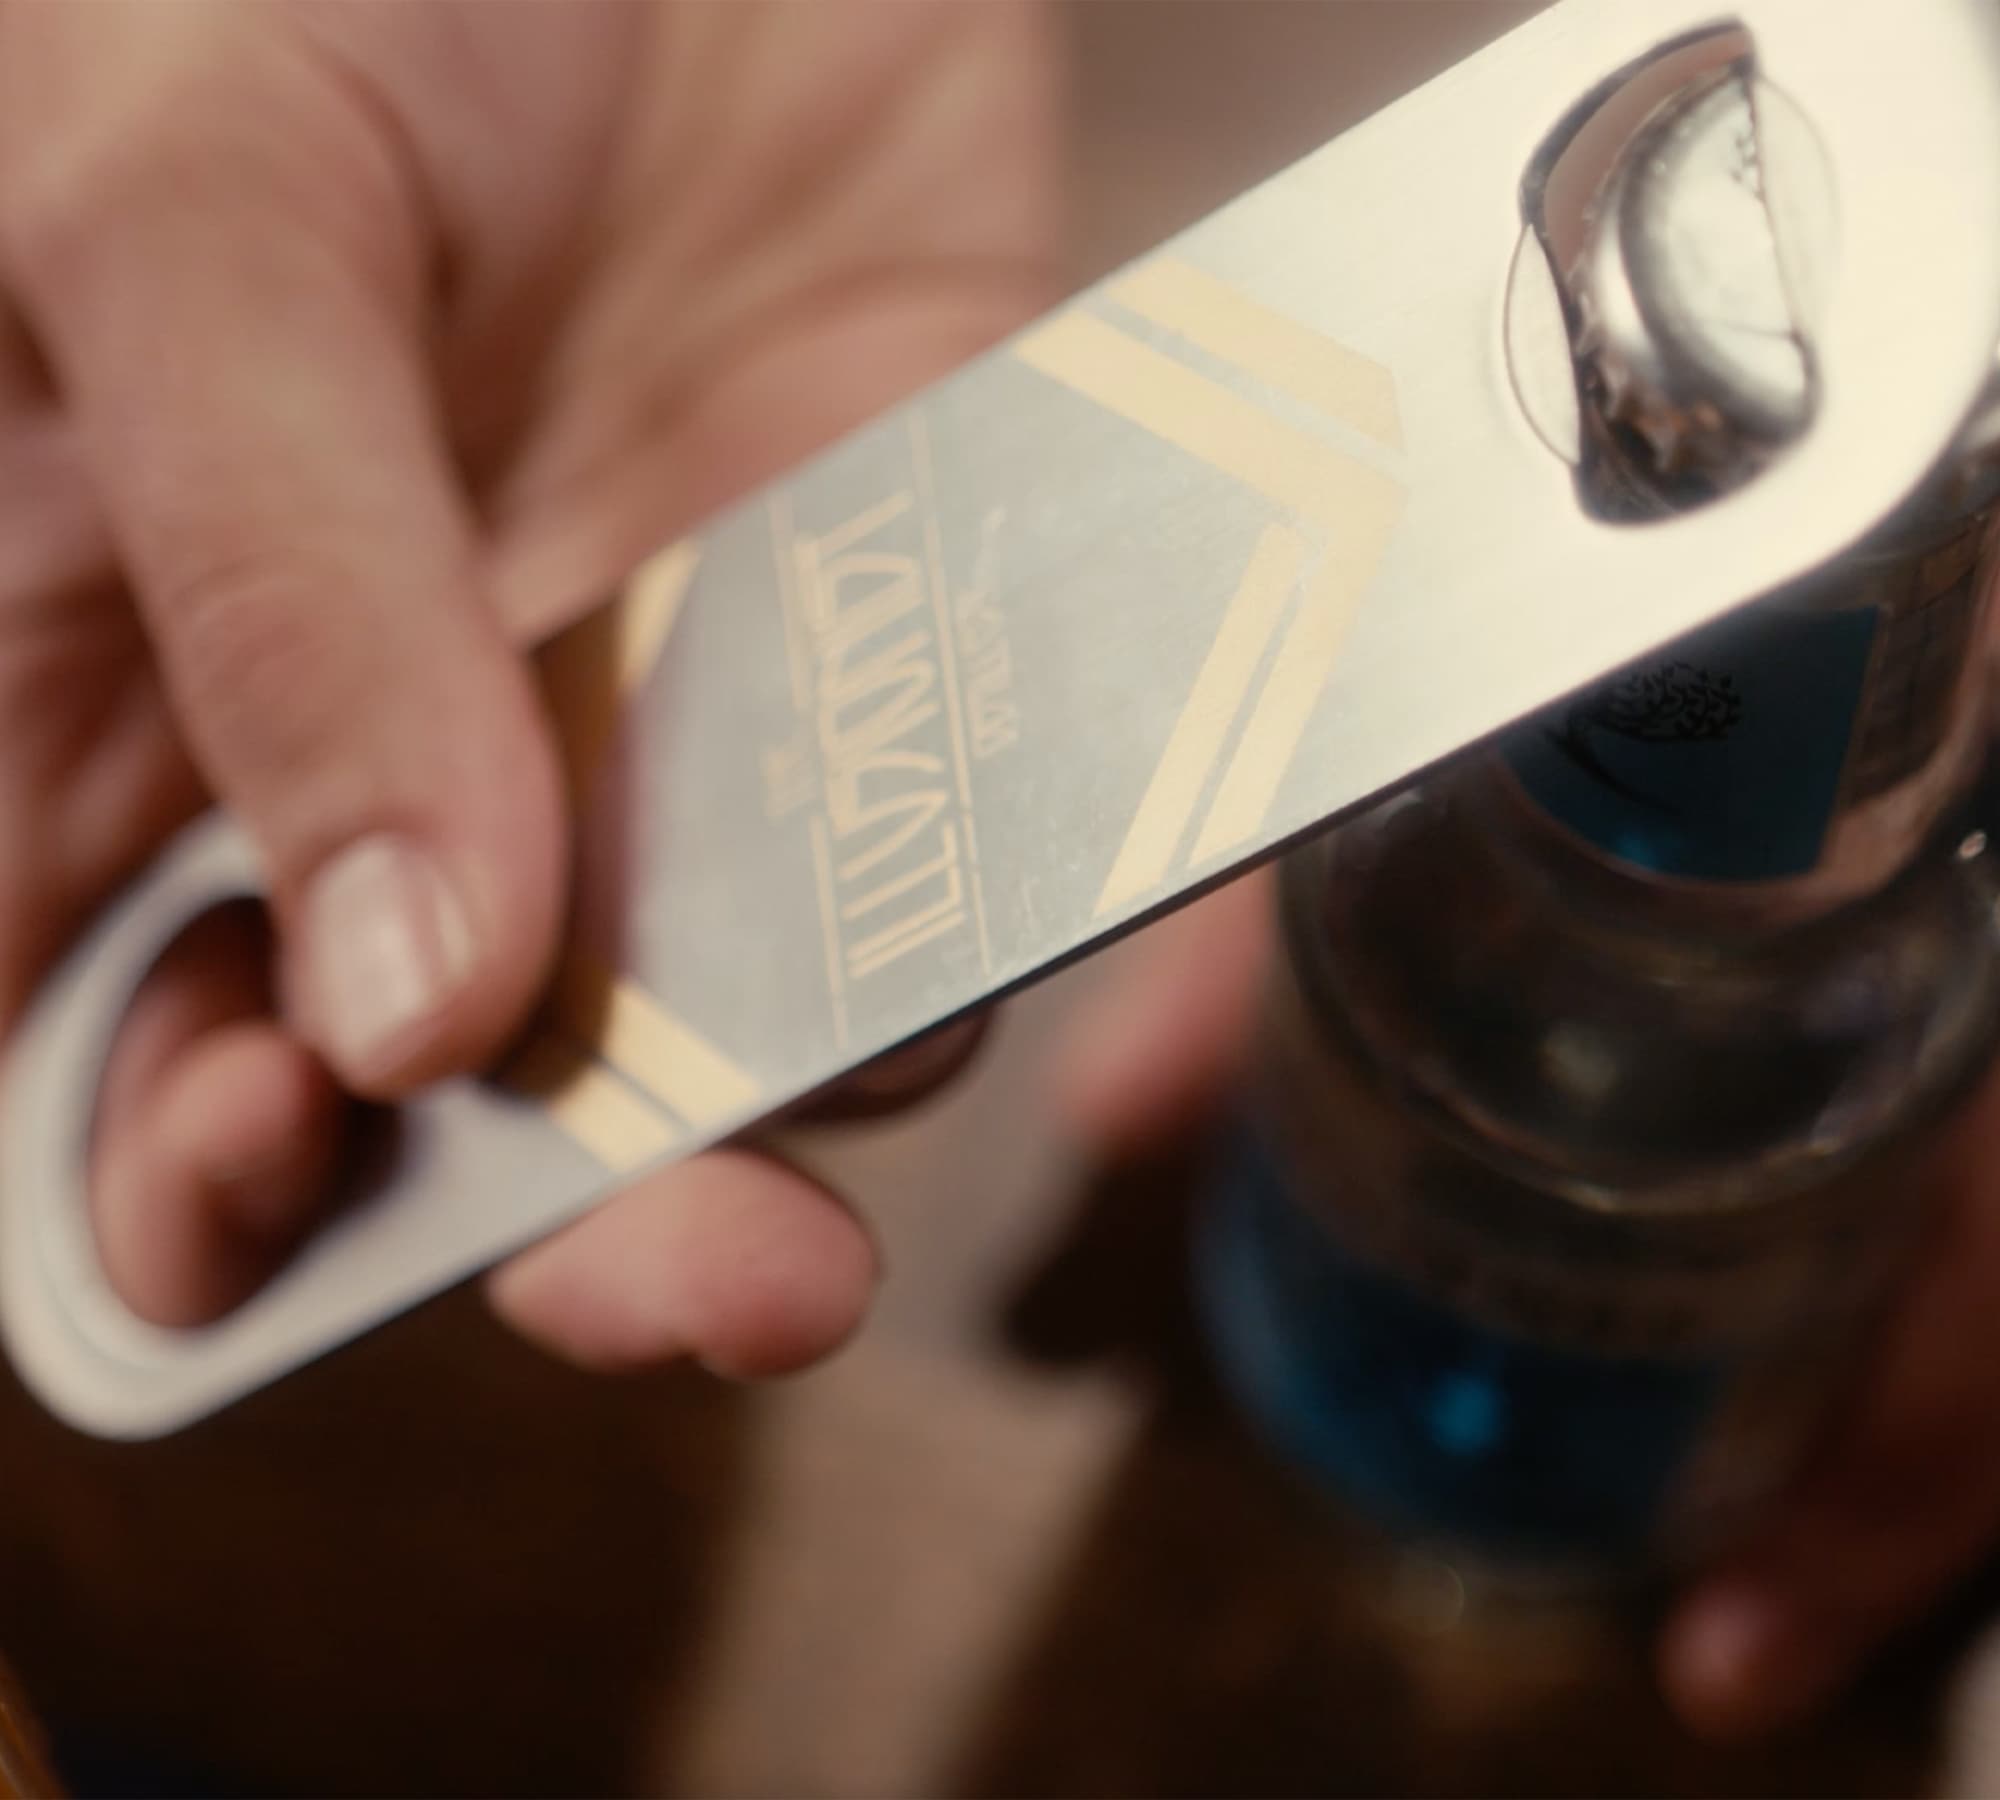 Using the Illusionist Gin bottle opener.